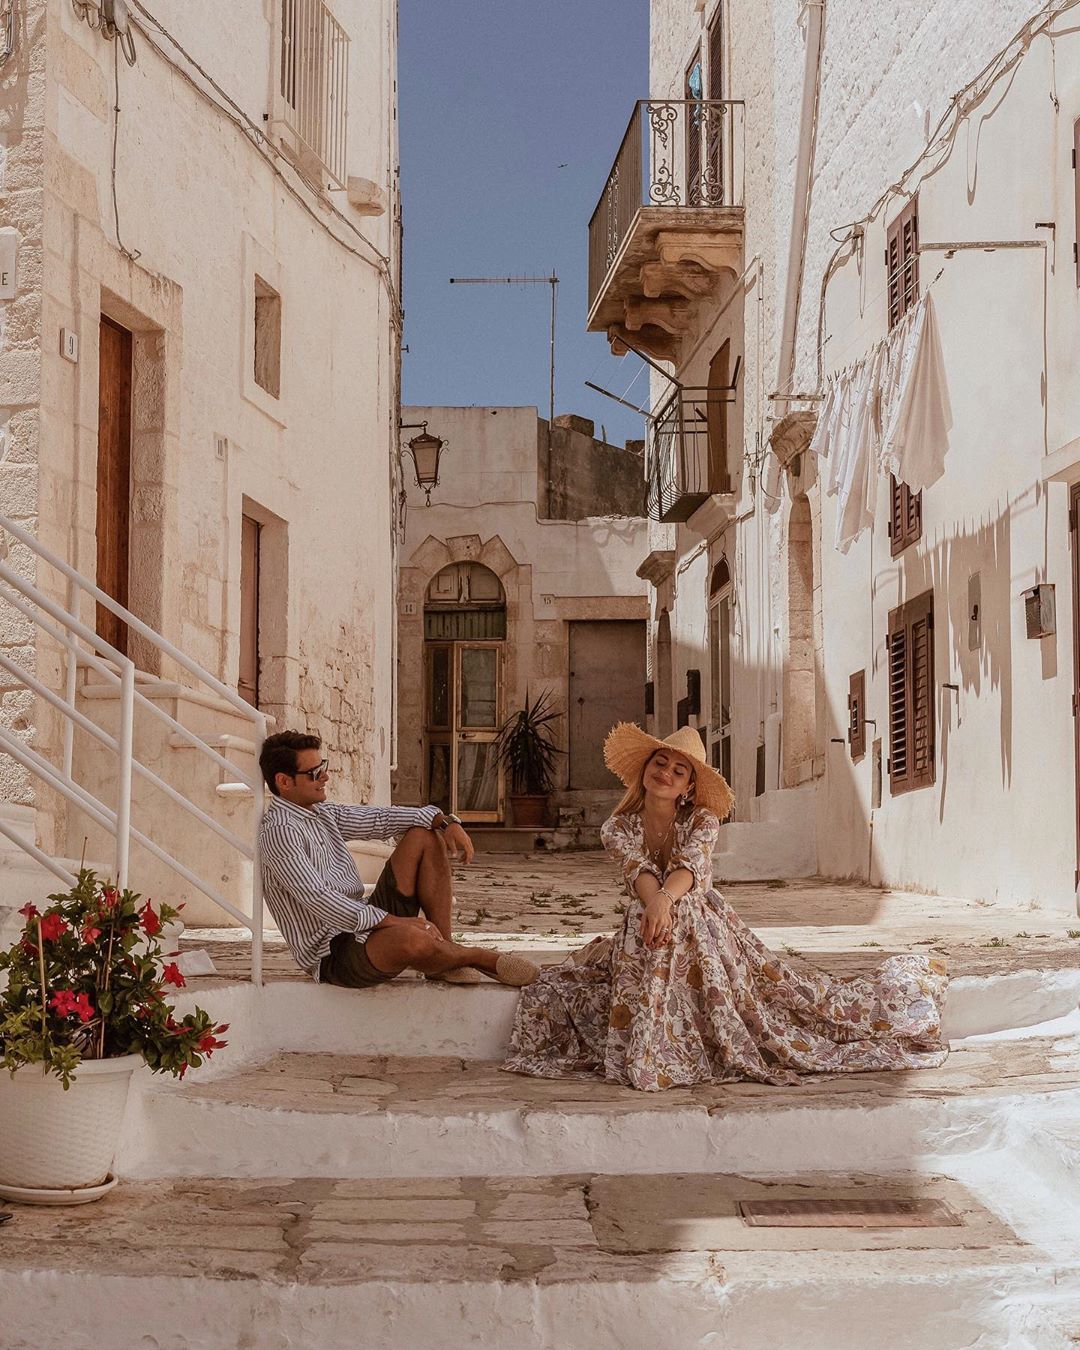 YOOX - Dolce Far Niente Puglia style from @giuliagaudino and @frankgallucci 's point of view! Discover more on stories 🇮🇹 #CiaoItalia